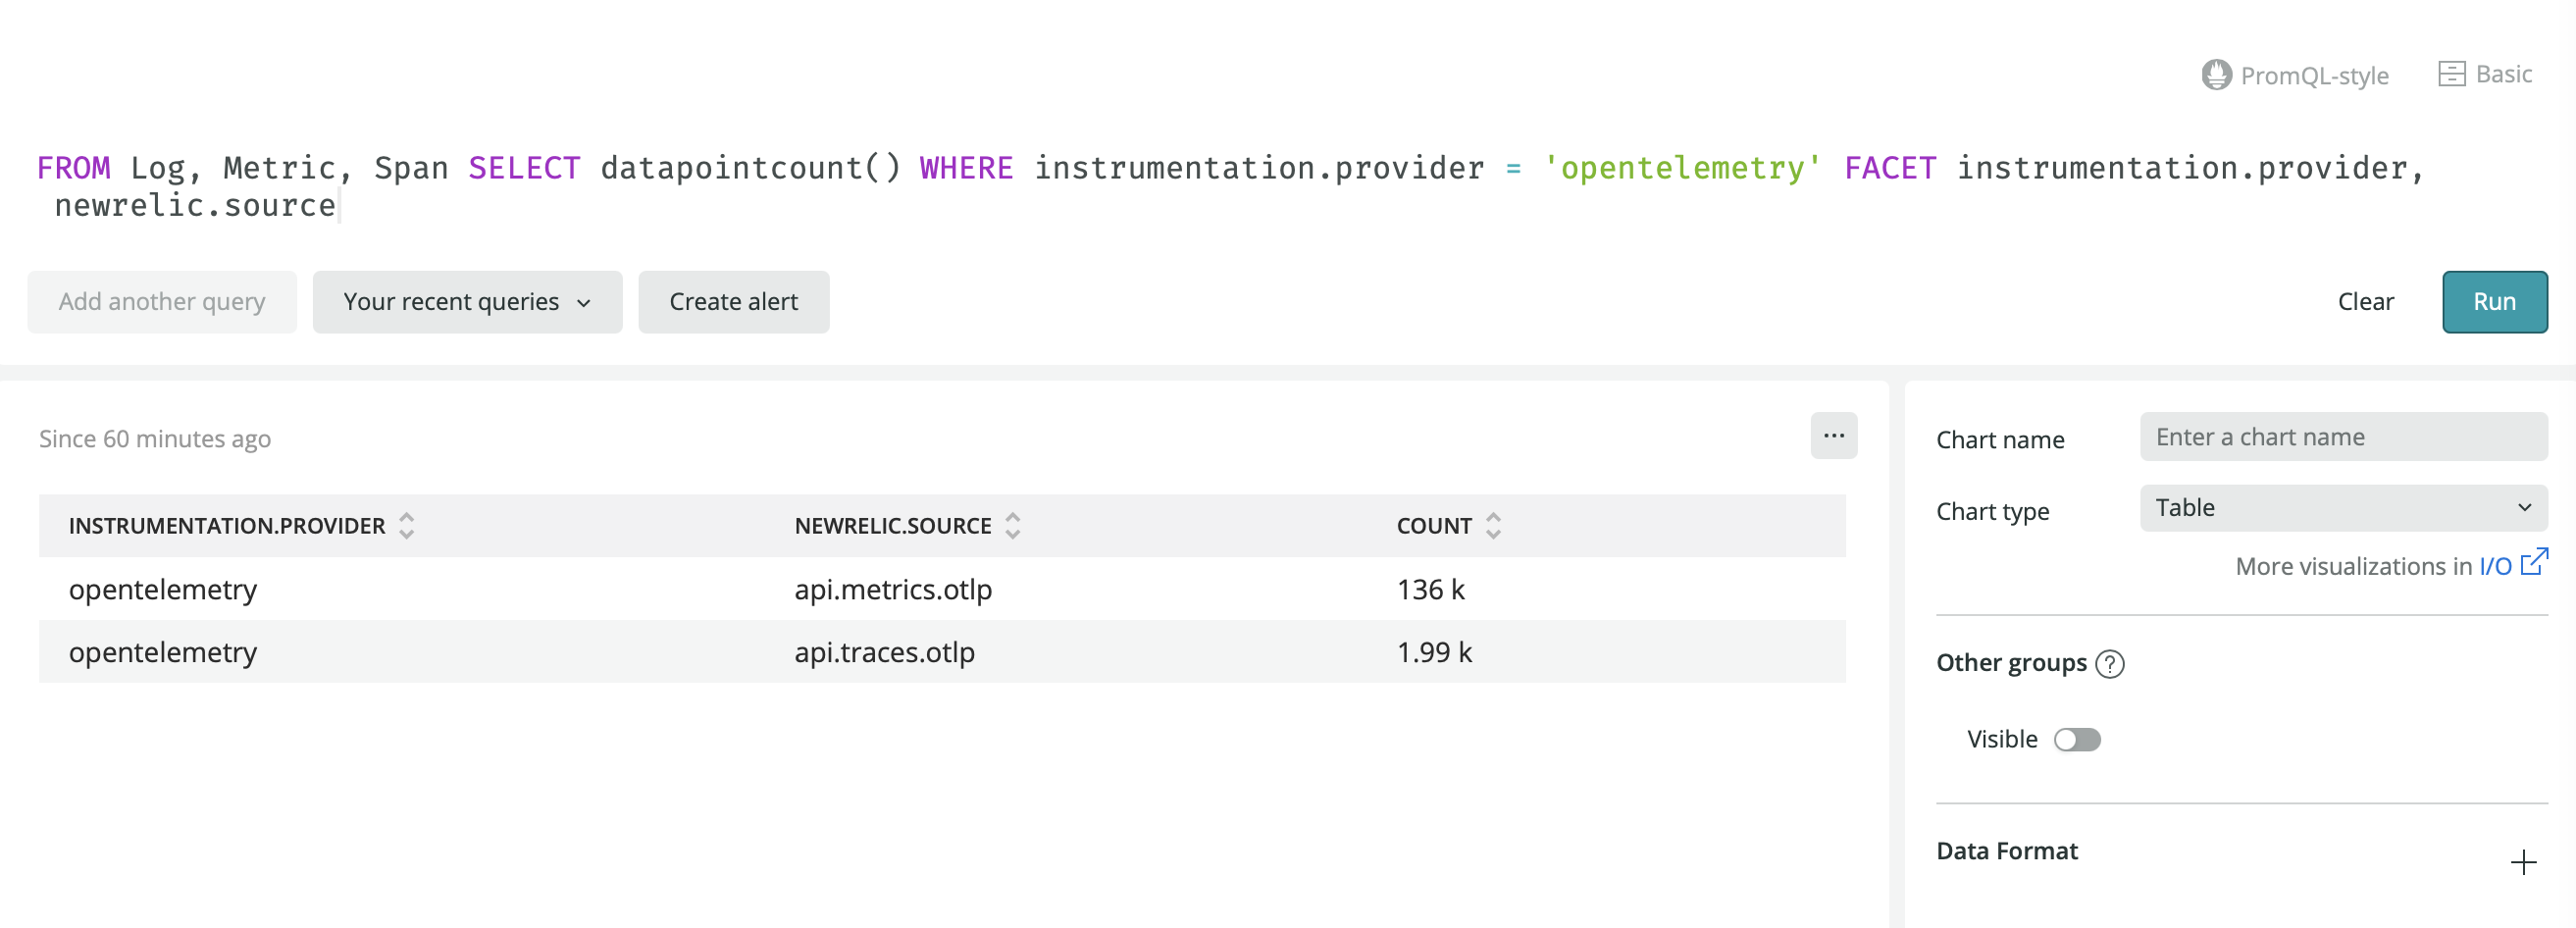 Screenshot showing the data point count for logs, metrics, and traces faceted by instrumentation.provider and newrelic.source